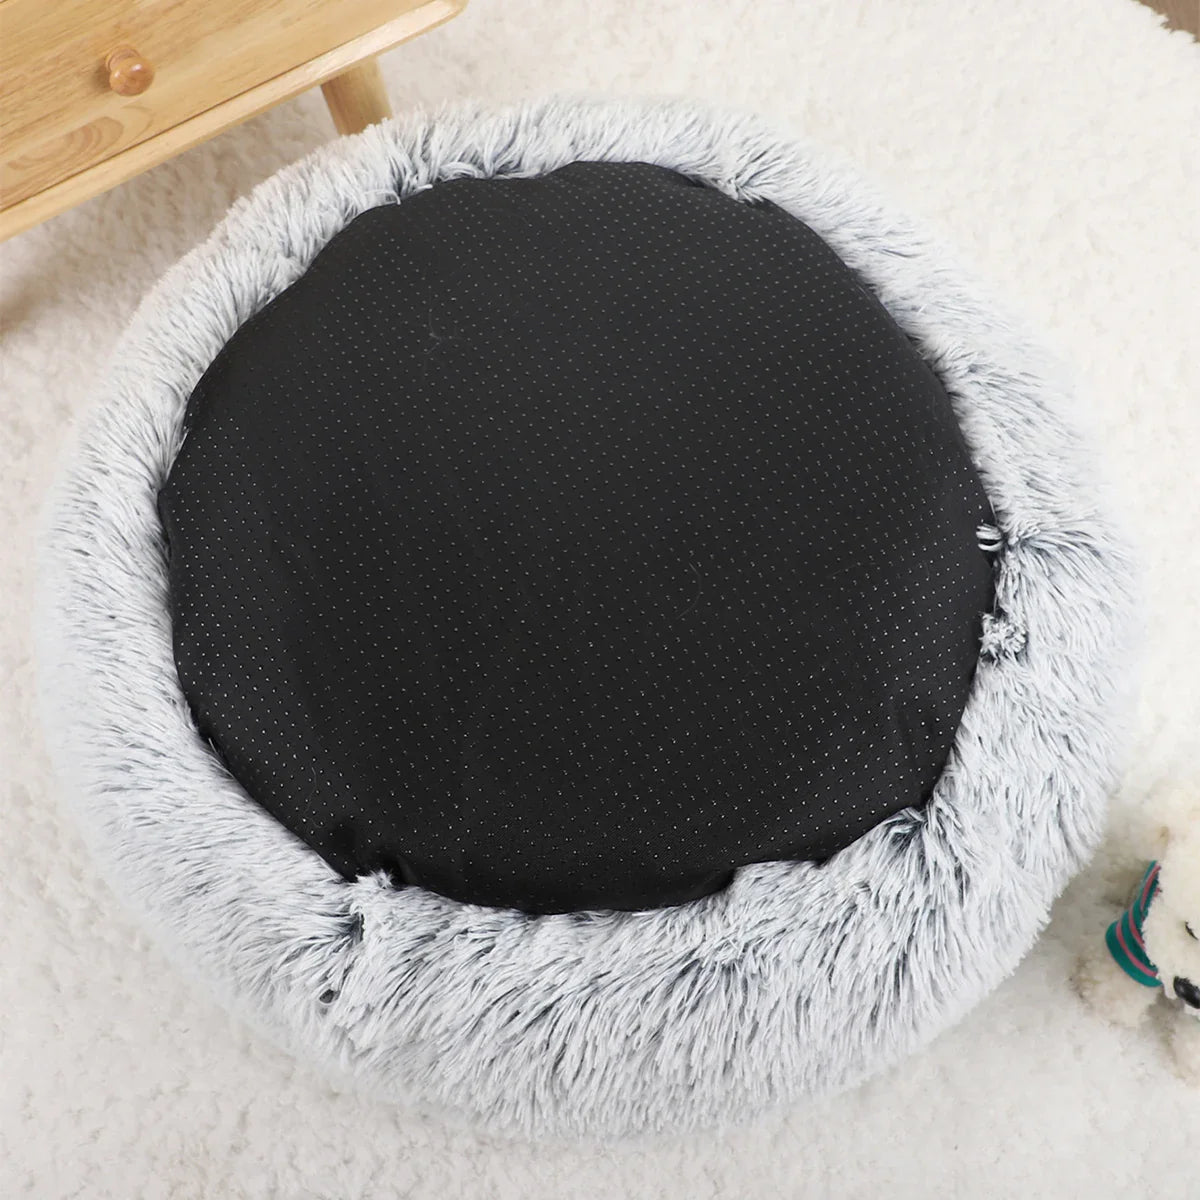 FLUFFY DOGS BEDS